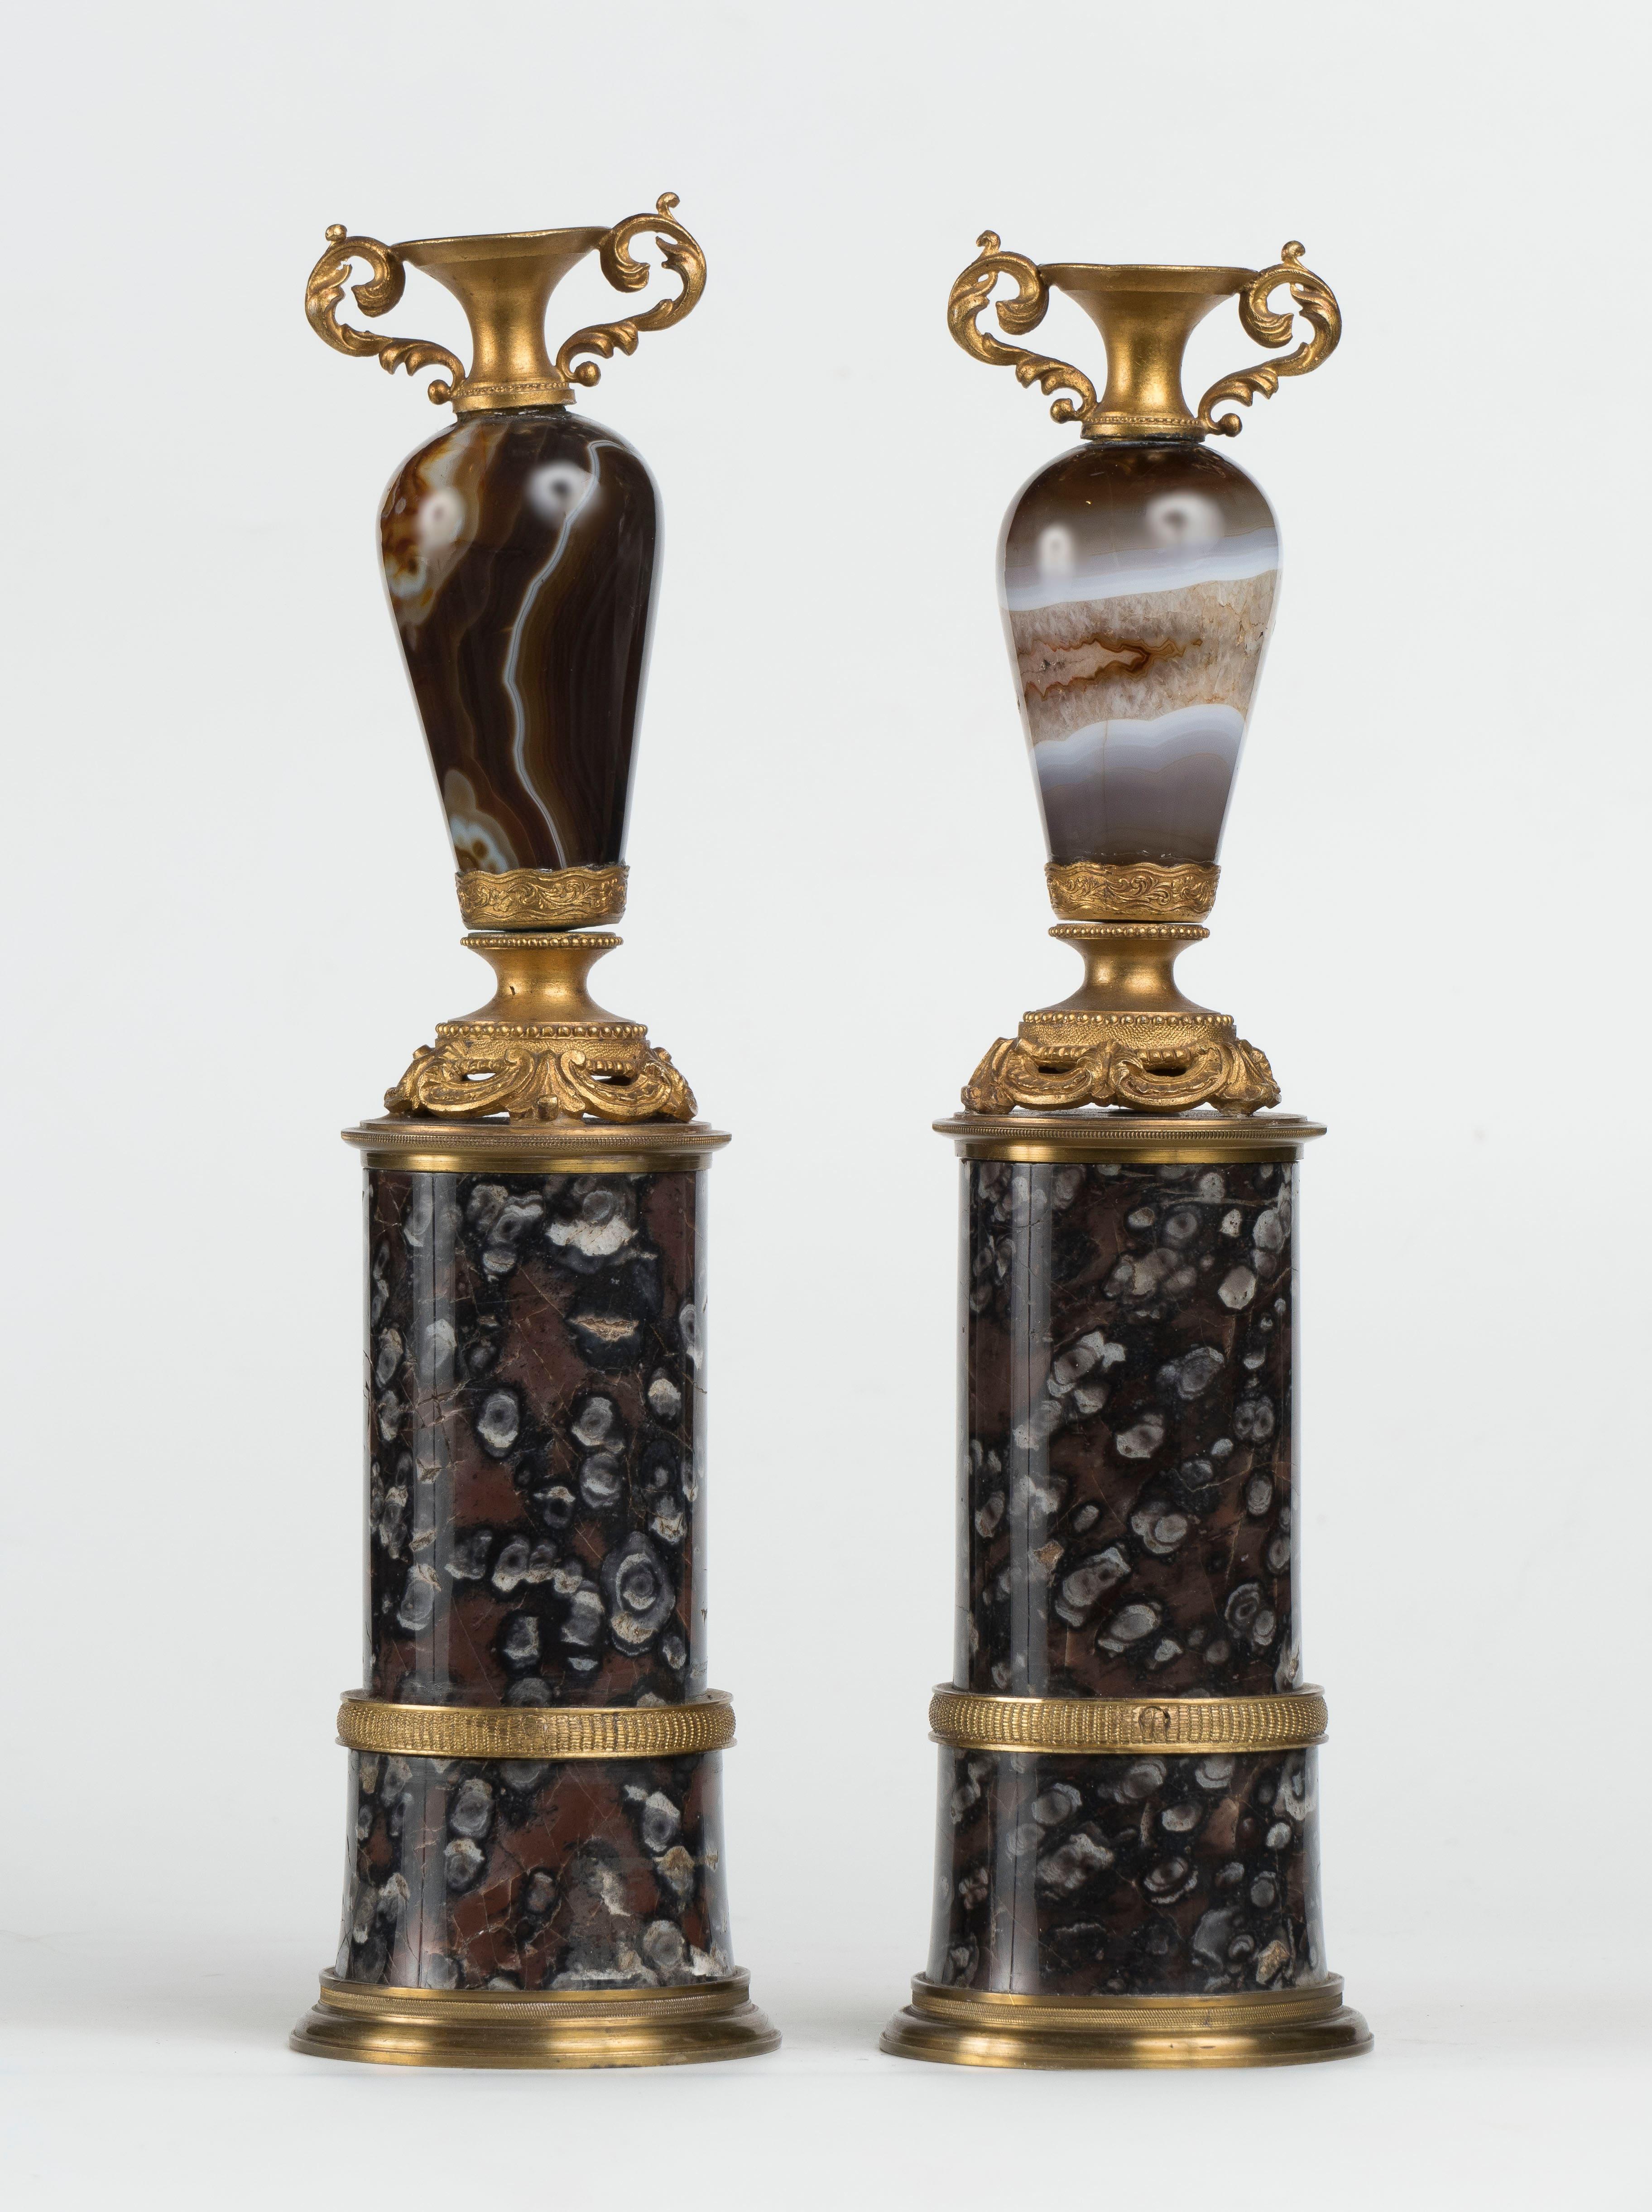 PAIR OF FRENCH MOUNTED PIETRA DURA URNS, 19TH CENTURY - Art by Unknown